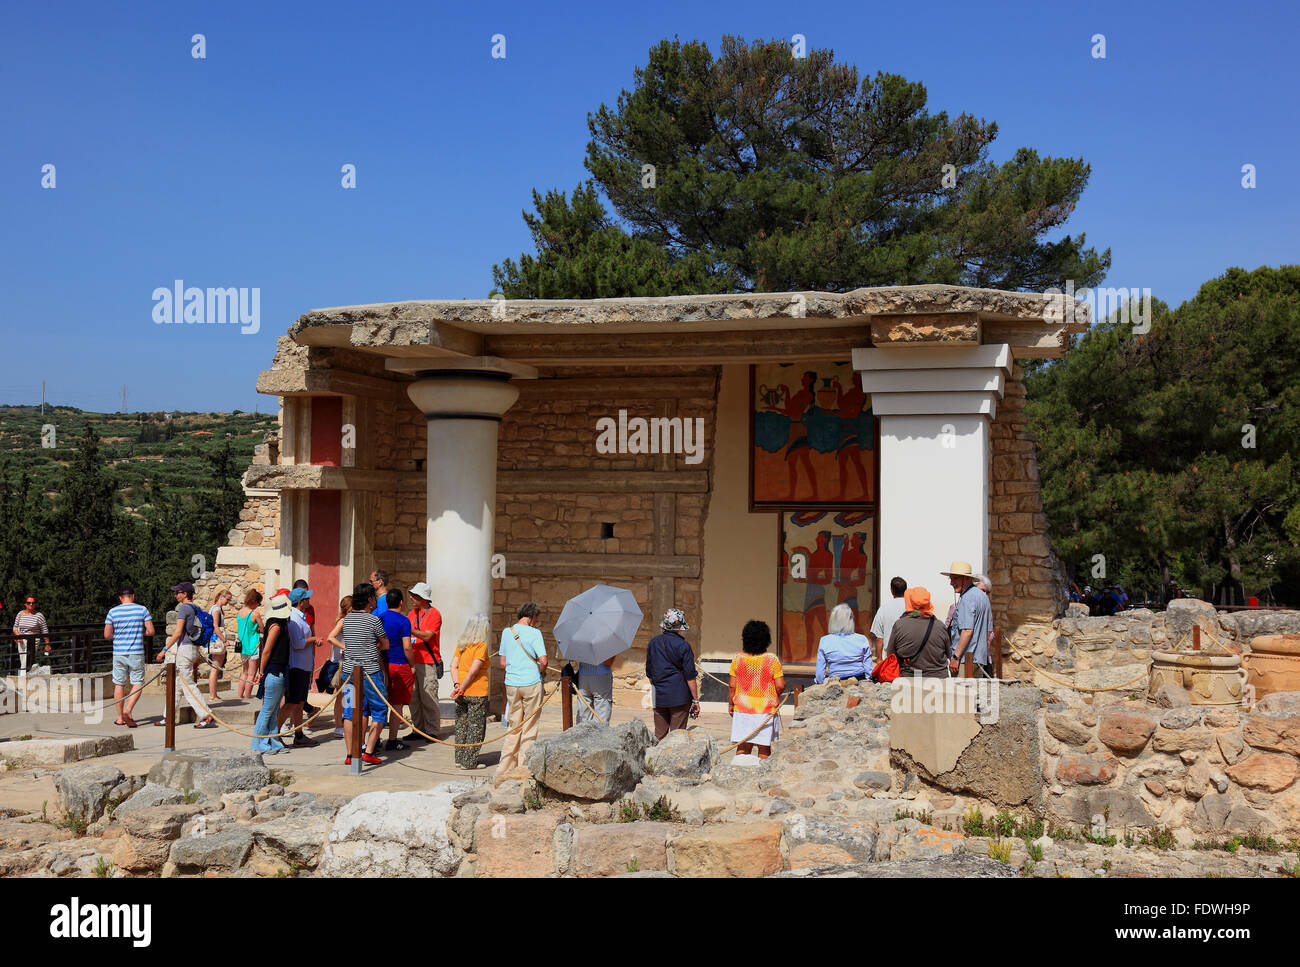 Crete, Knossos, palace complex of the Minoer, visitors before the vascular bearer's fresco in the Suedpropylon, reconstruction Stock Photo